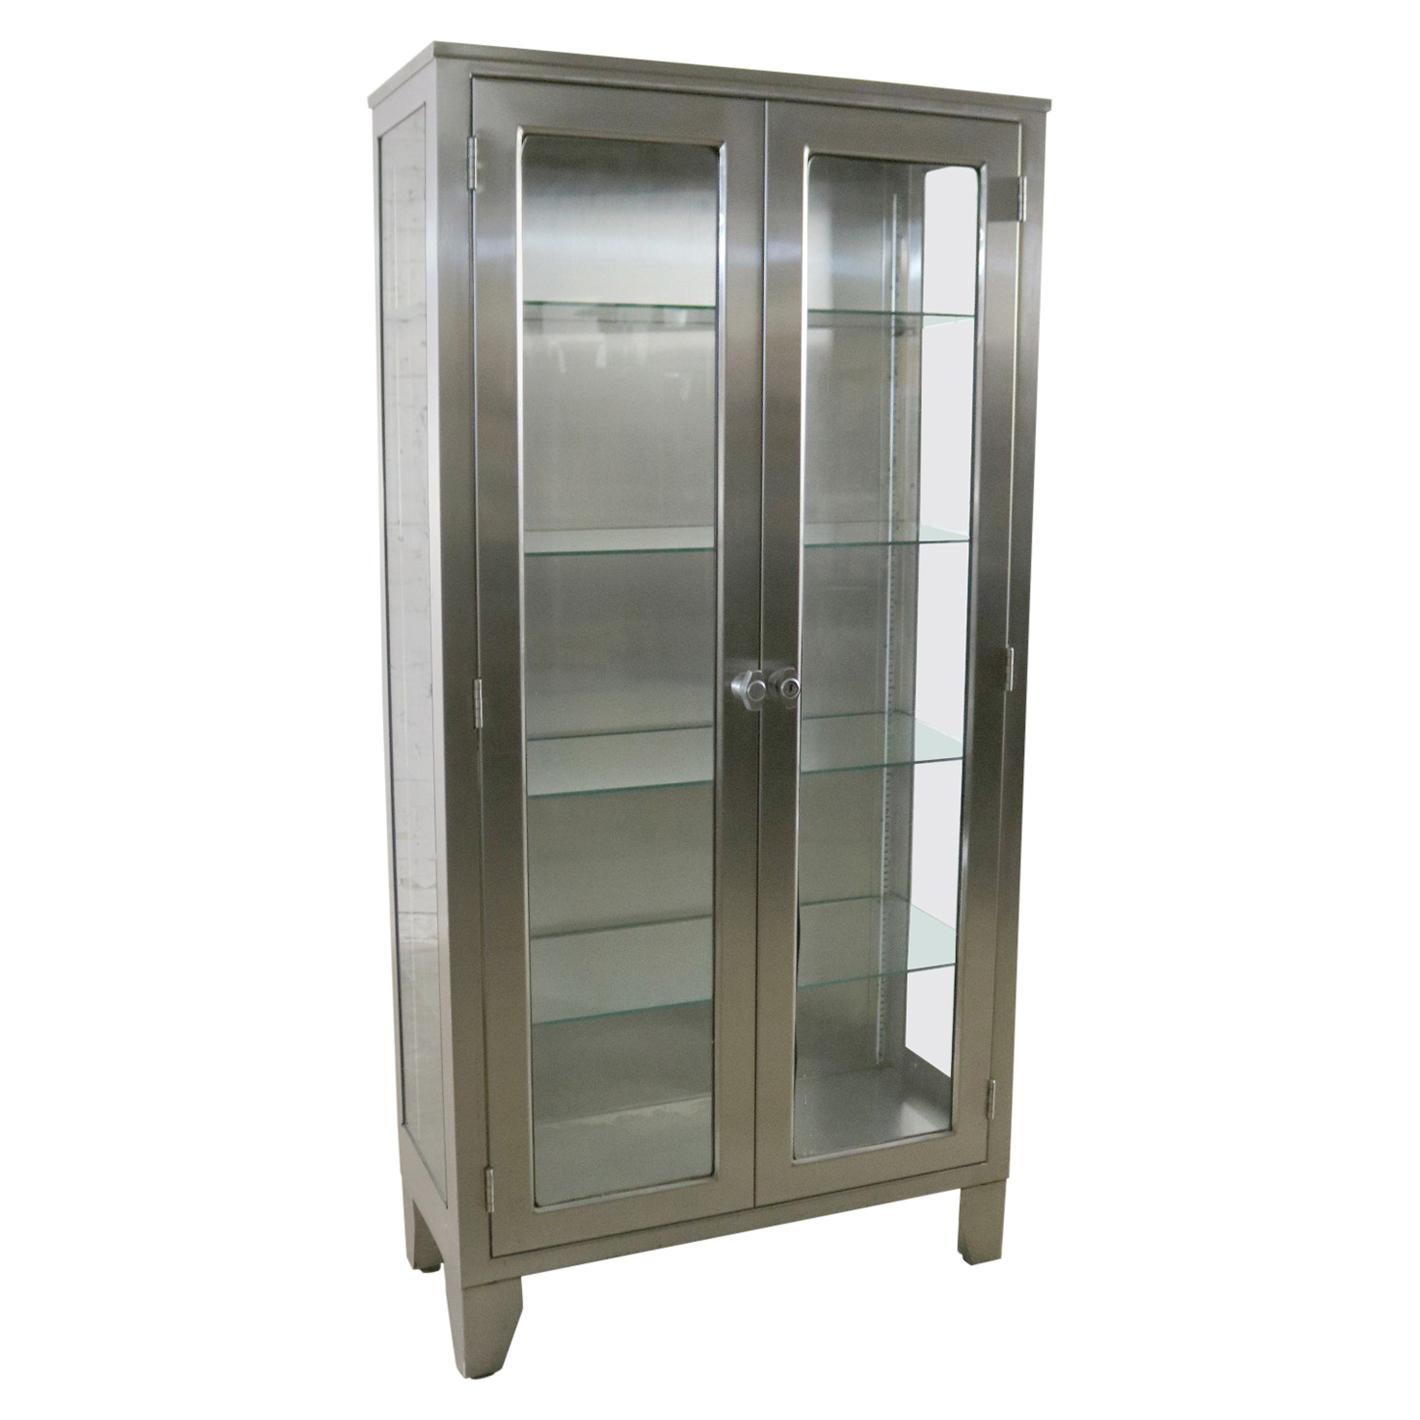 Stainless Steel Industrial Display Apothecary Medical Cabinet with Glass Doors 6